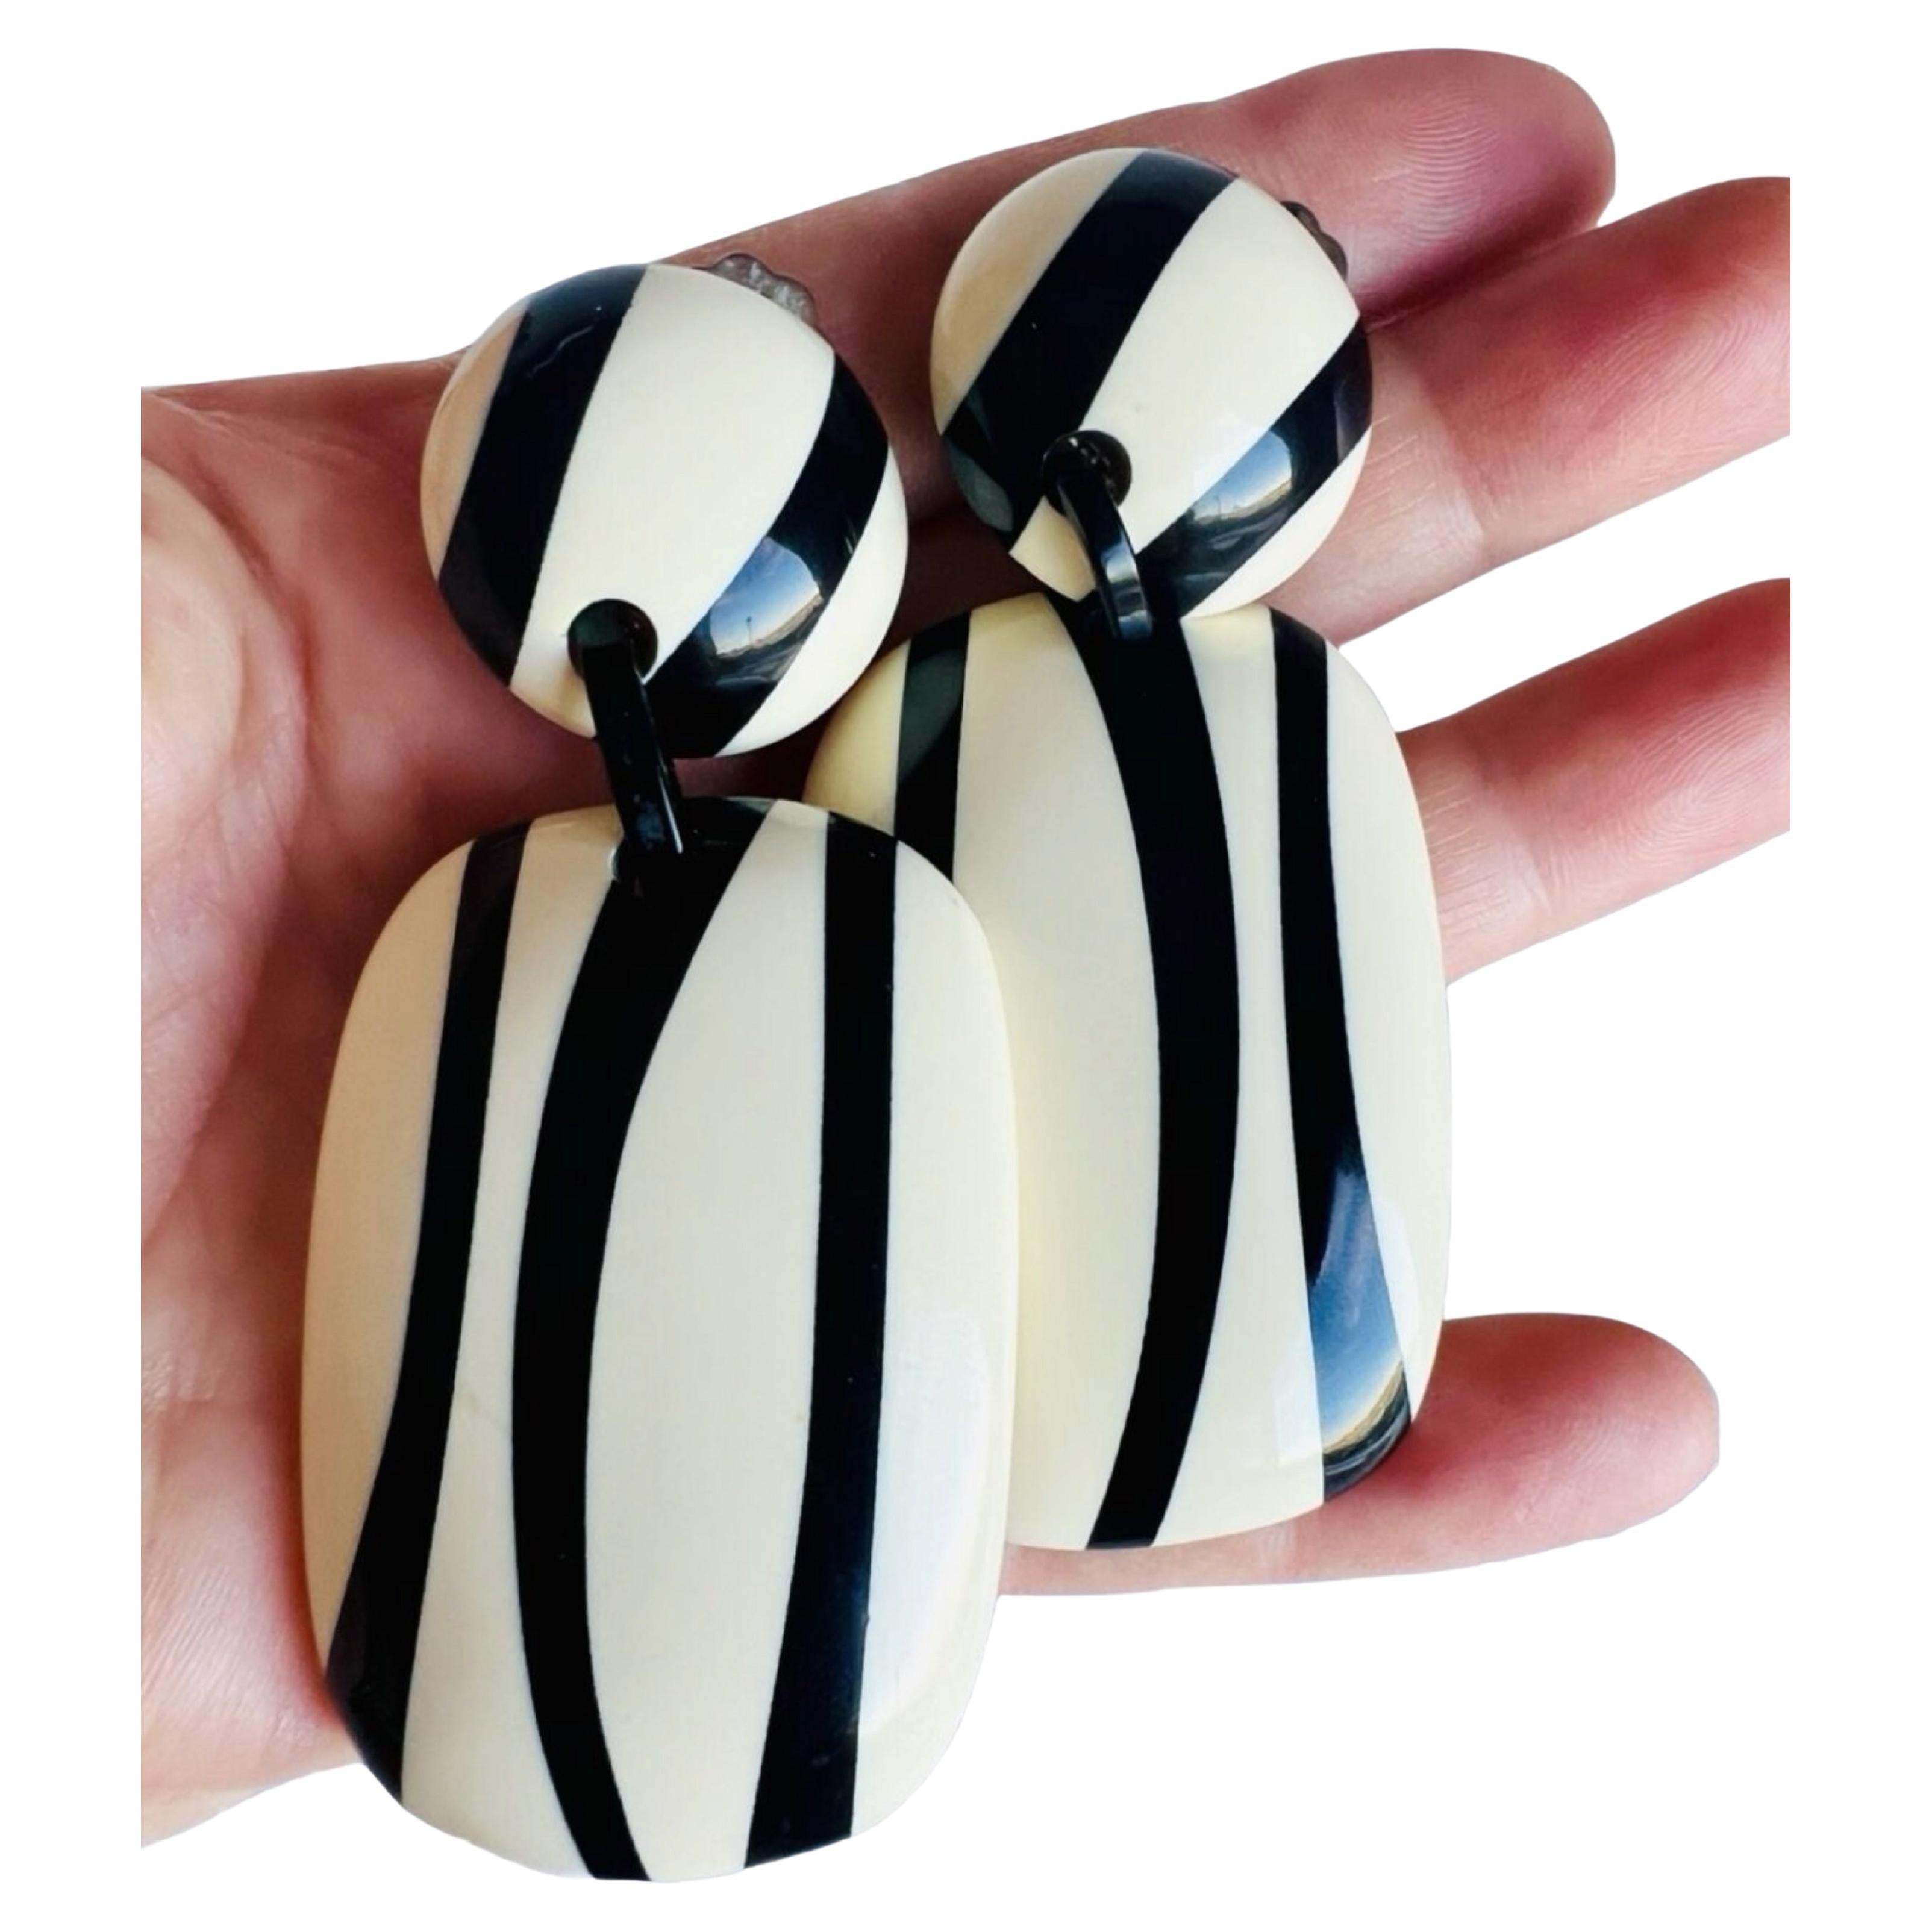 These extra large vintage earrings are a stunning addition to any jewelry collection. The black and white resin material gives them a retro feel, while the geometric shape and long dangle design provide a modern twist. The clip-on closure makes them